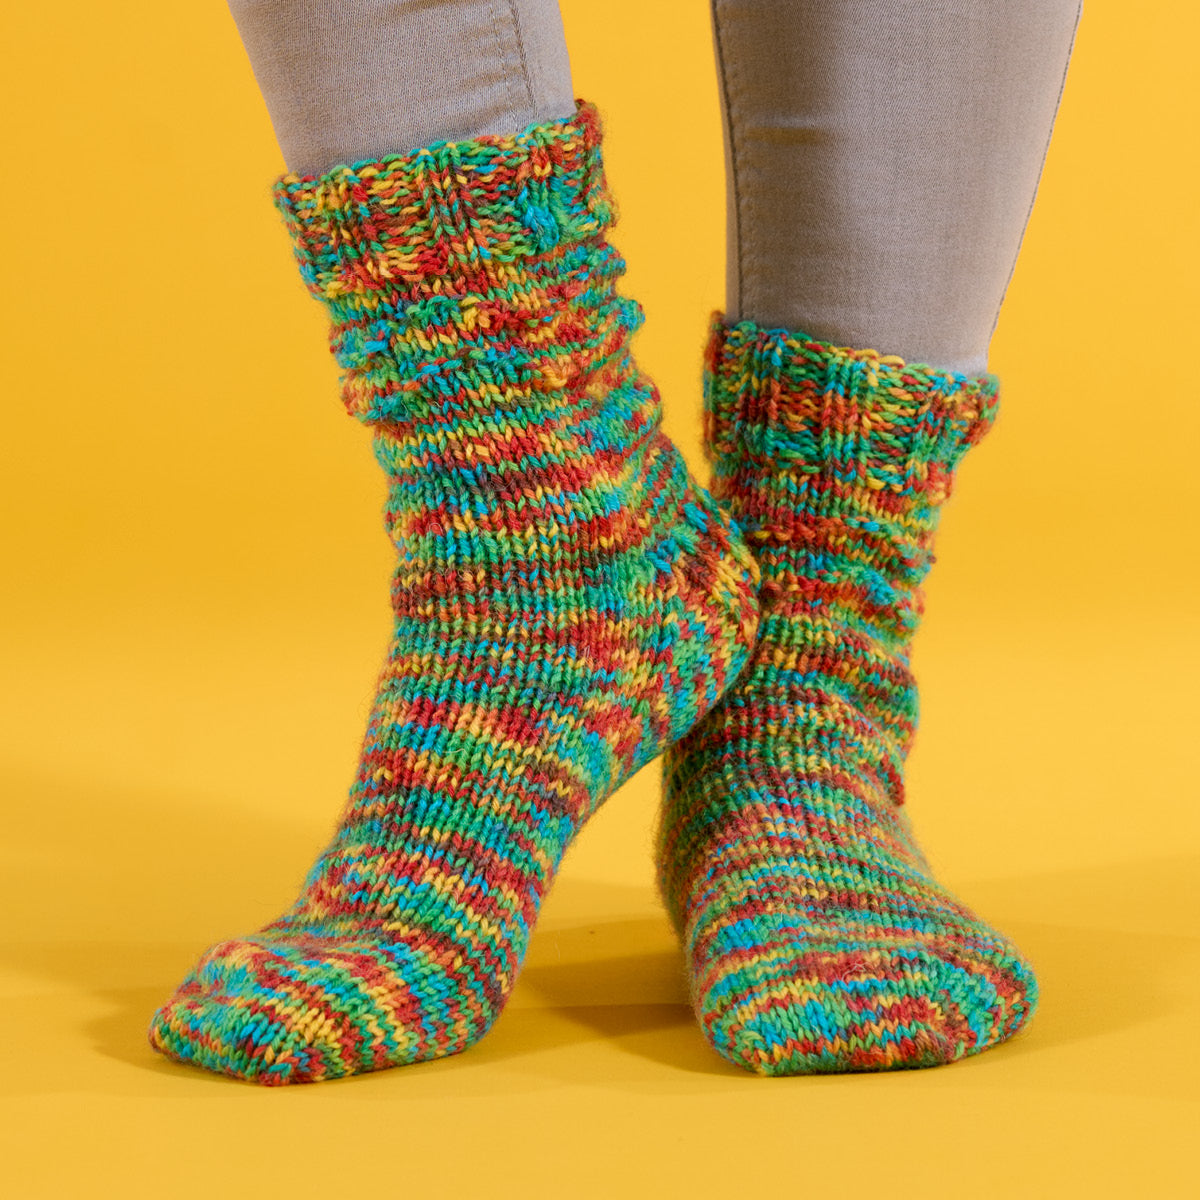 ColourLab Sock DK Wool - Good Vibrations! - West Yorkshire Spinners